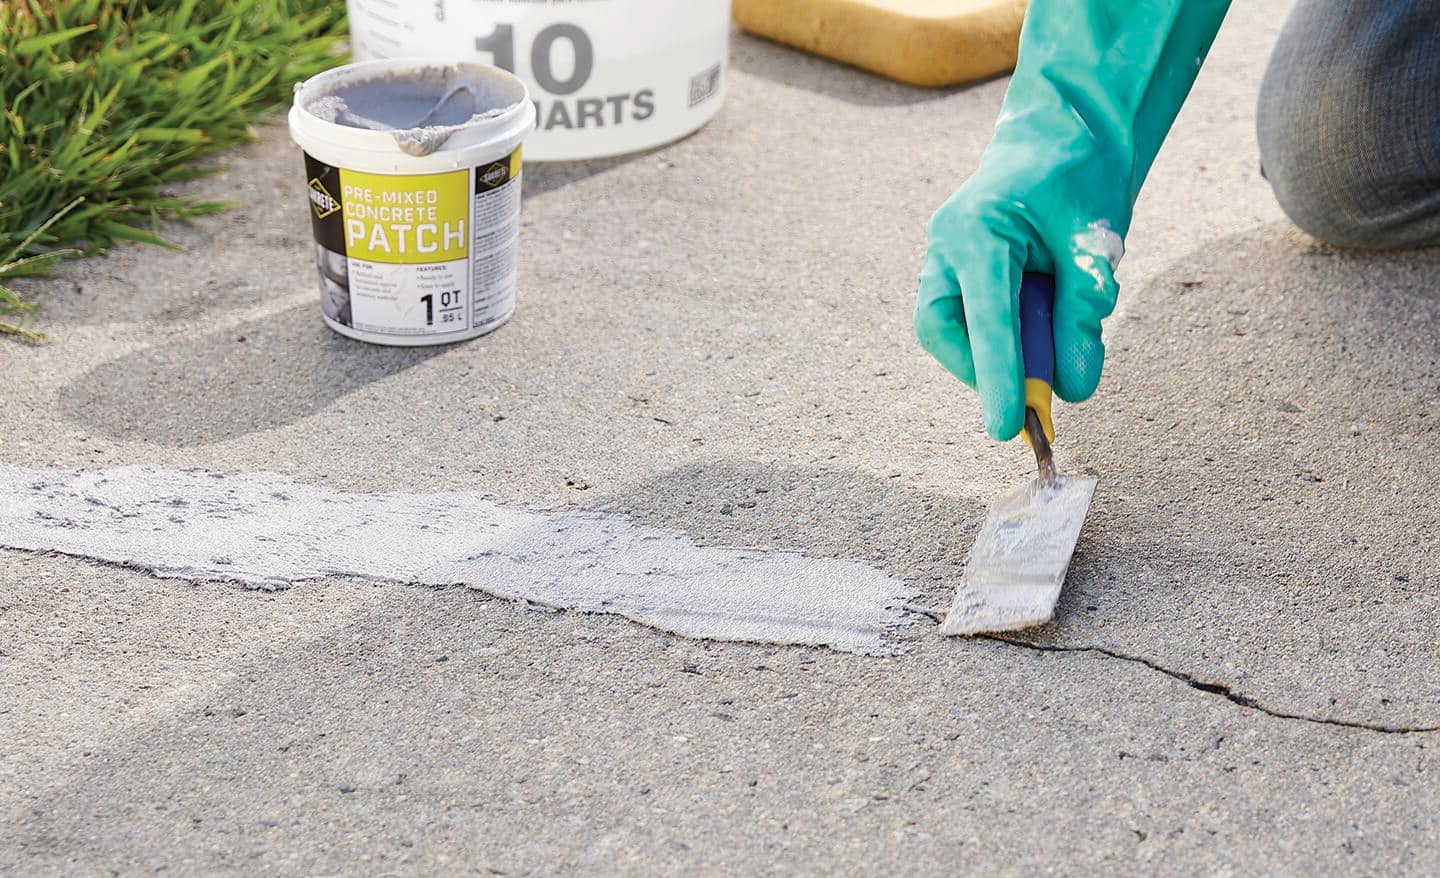 Using a trowel, a person smooths repair mix over a crack.